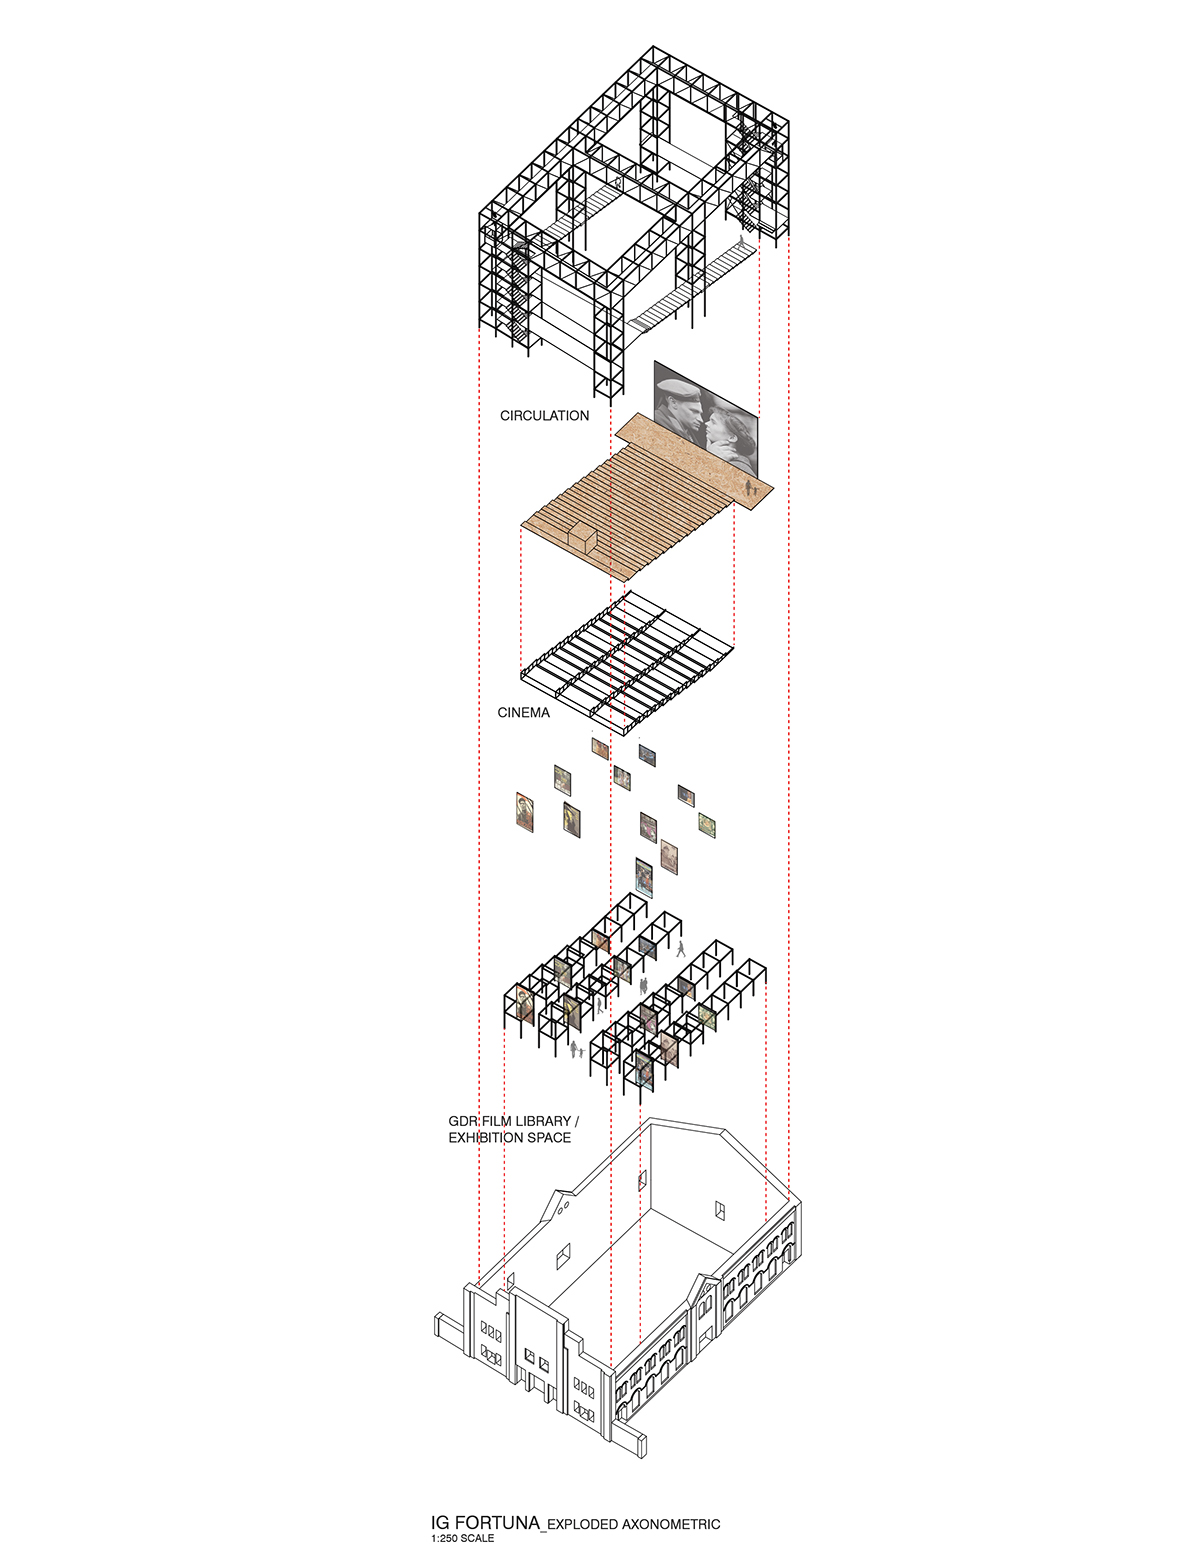 Masters Thesis urban commoning public space bottom up intervention industrial Cinema studio